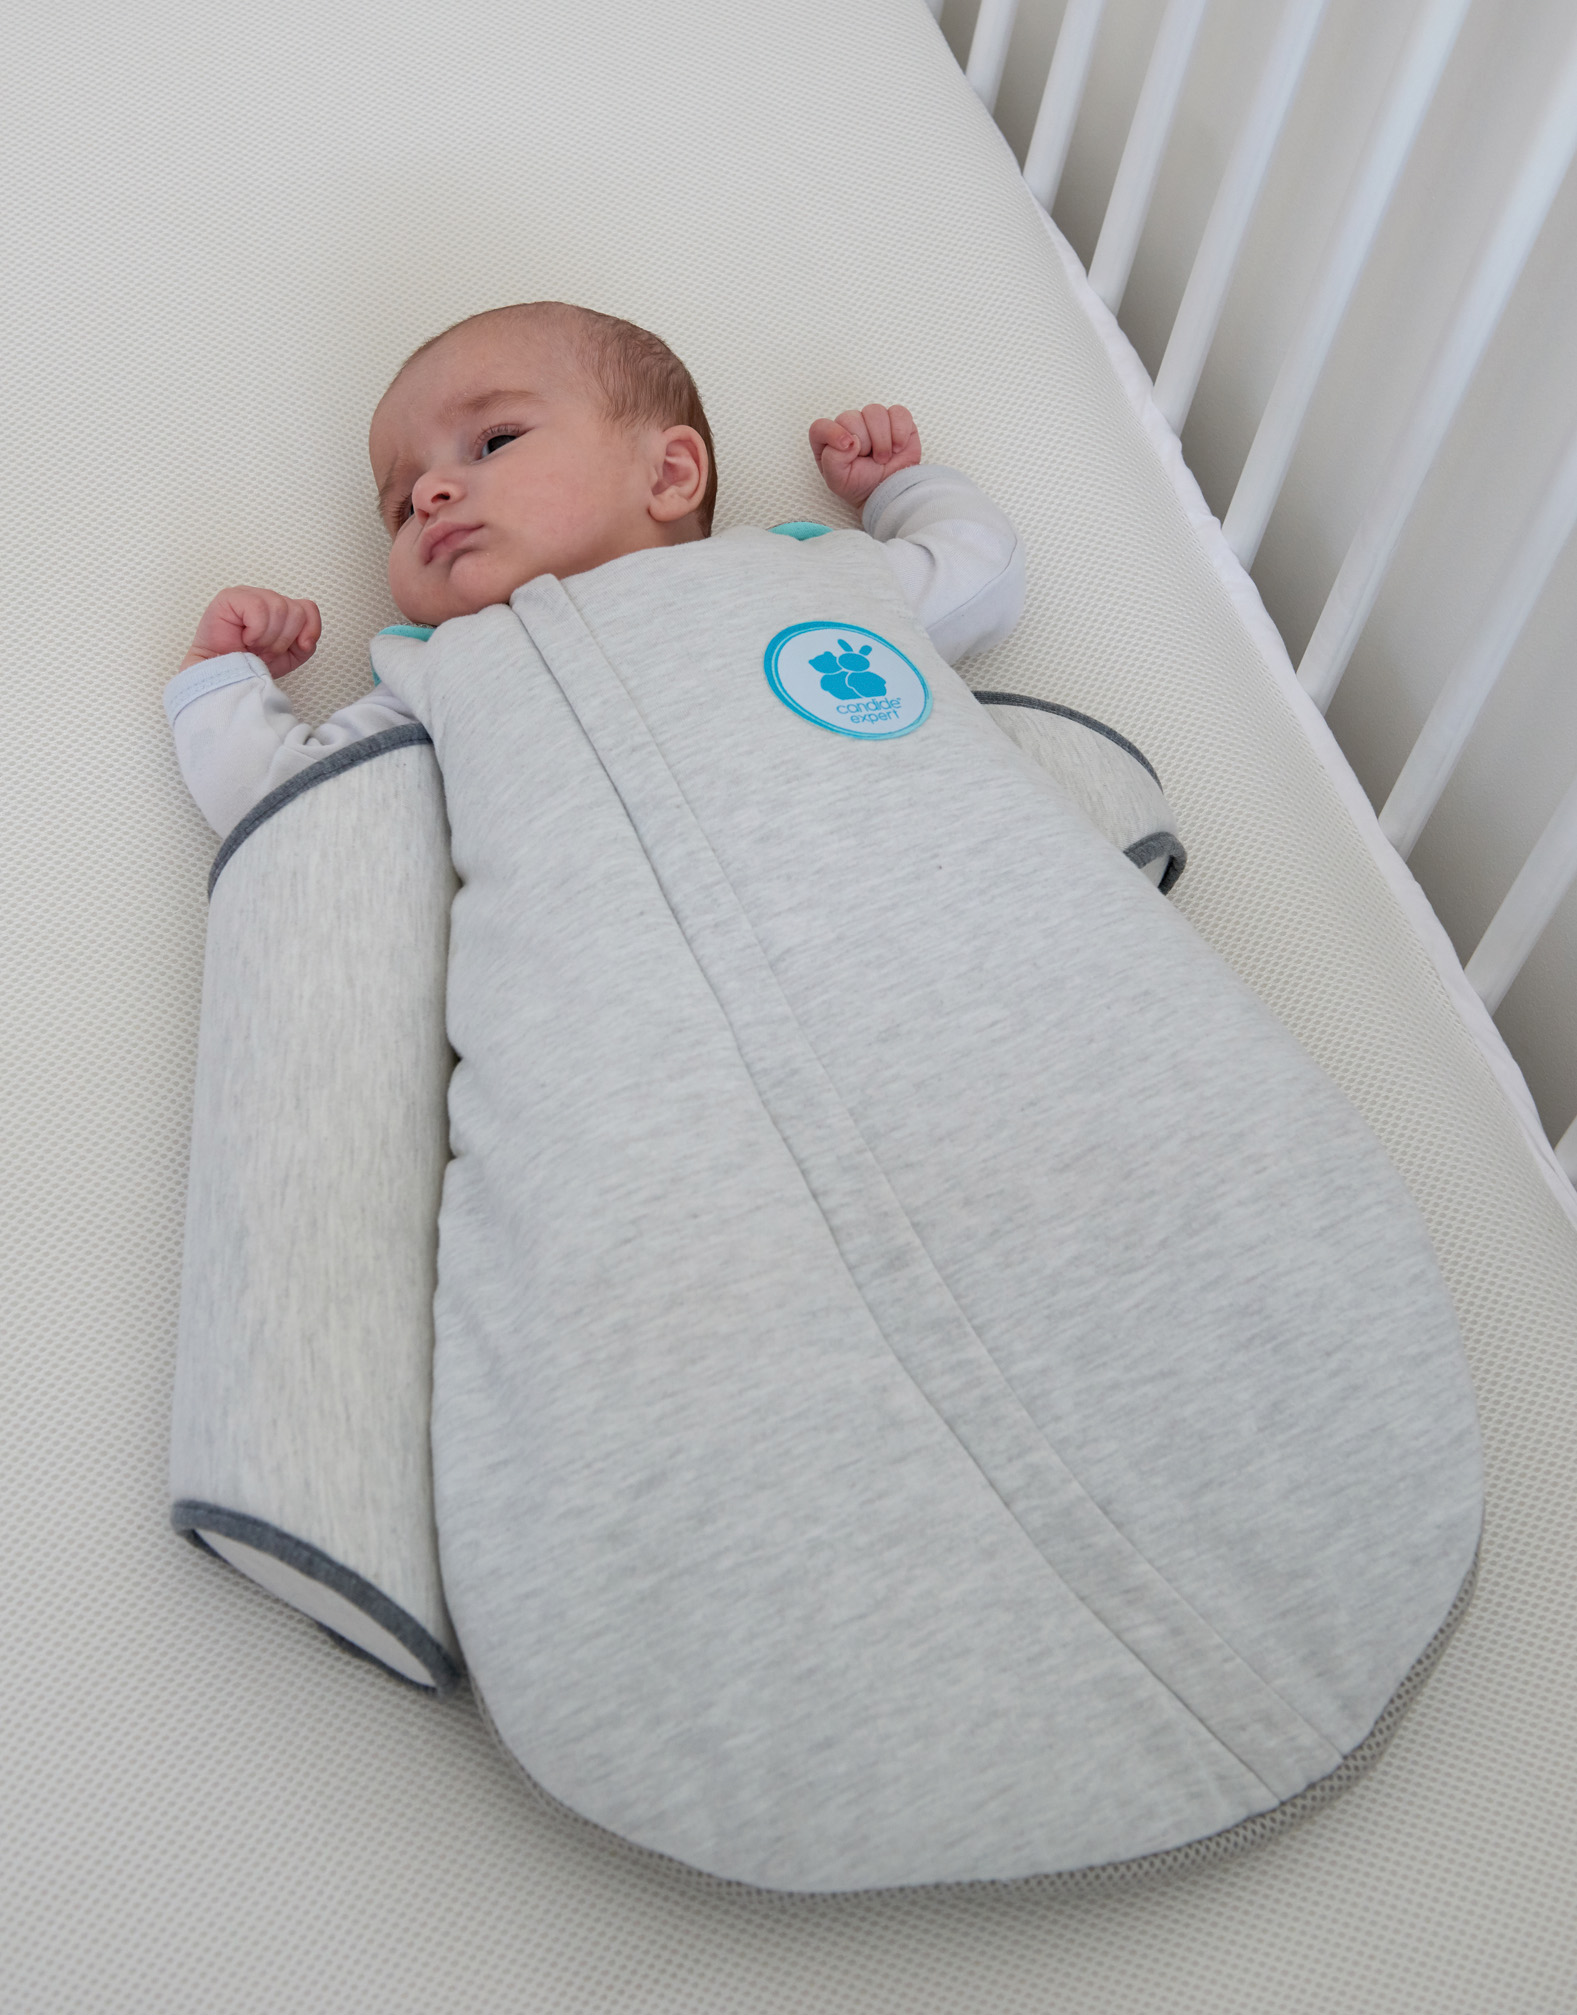 Cale Bebe Ergonomique Air Products And Accessories For Baby Brand Of Candide Nursery Nursing